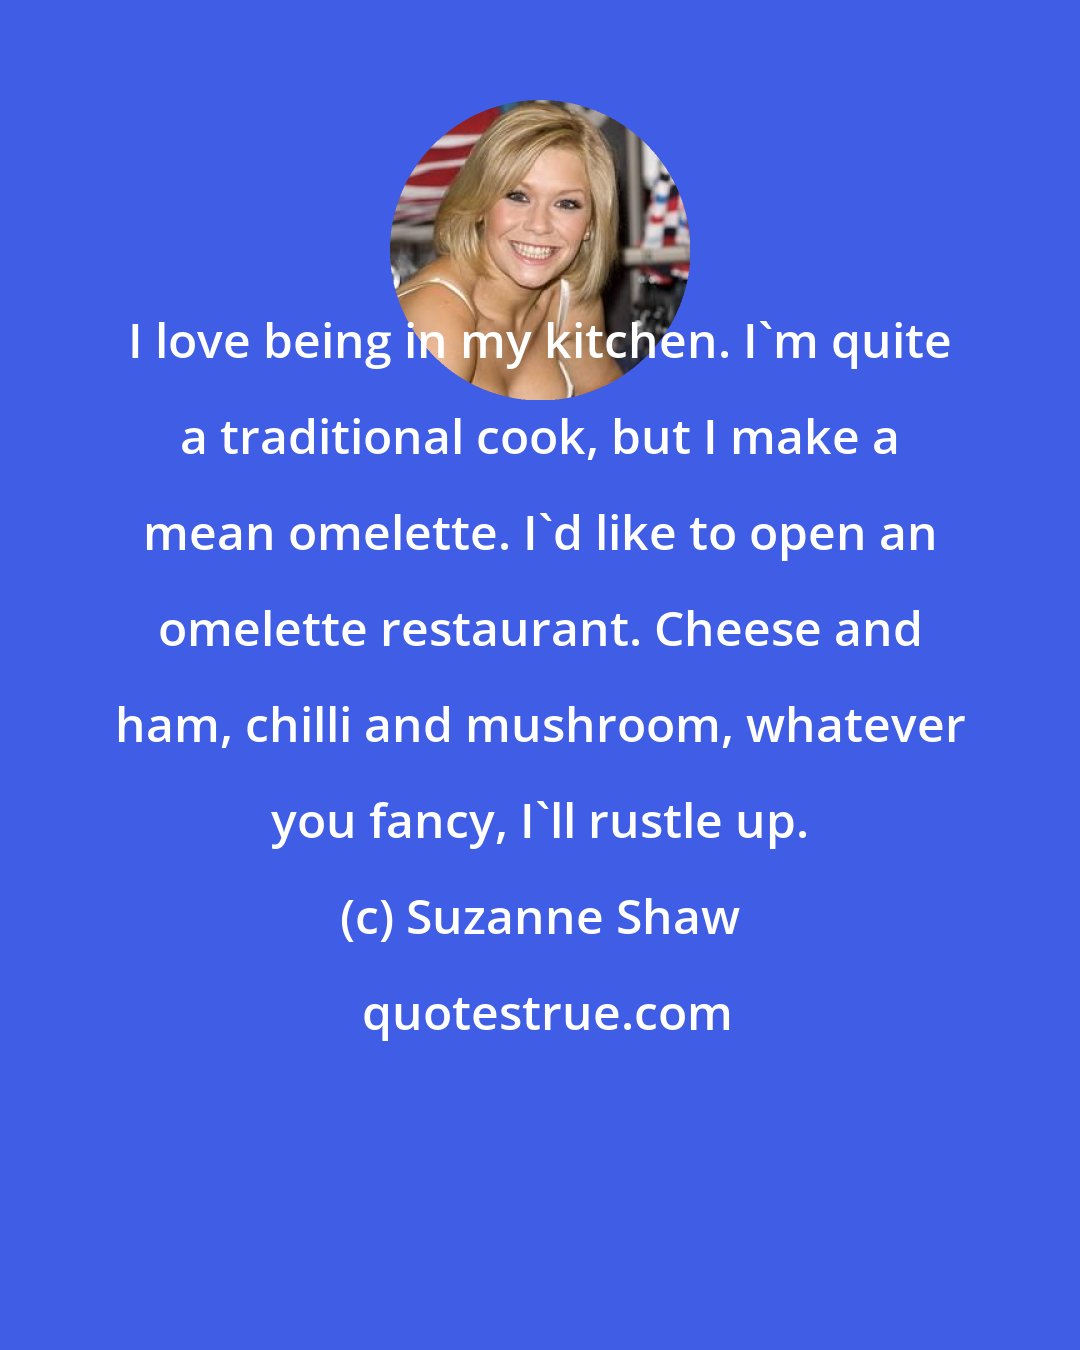 Suzanne Shaw: I love being in my kitchen. I'm quite a traditional cook, but I make a mean omelette. I'd like to open an omelette restaurant. Cheese and ham, chilli and mushroom, whatever you fancy, I'll rustle up.